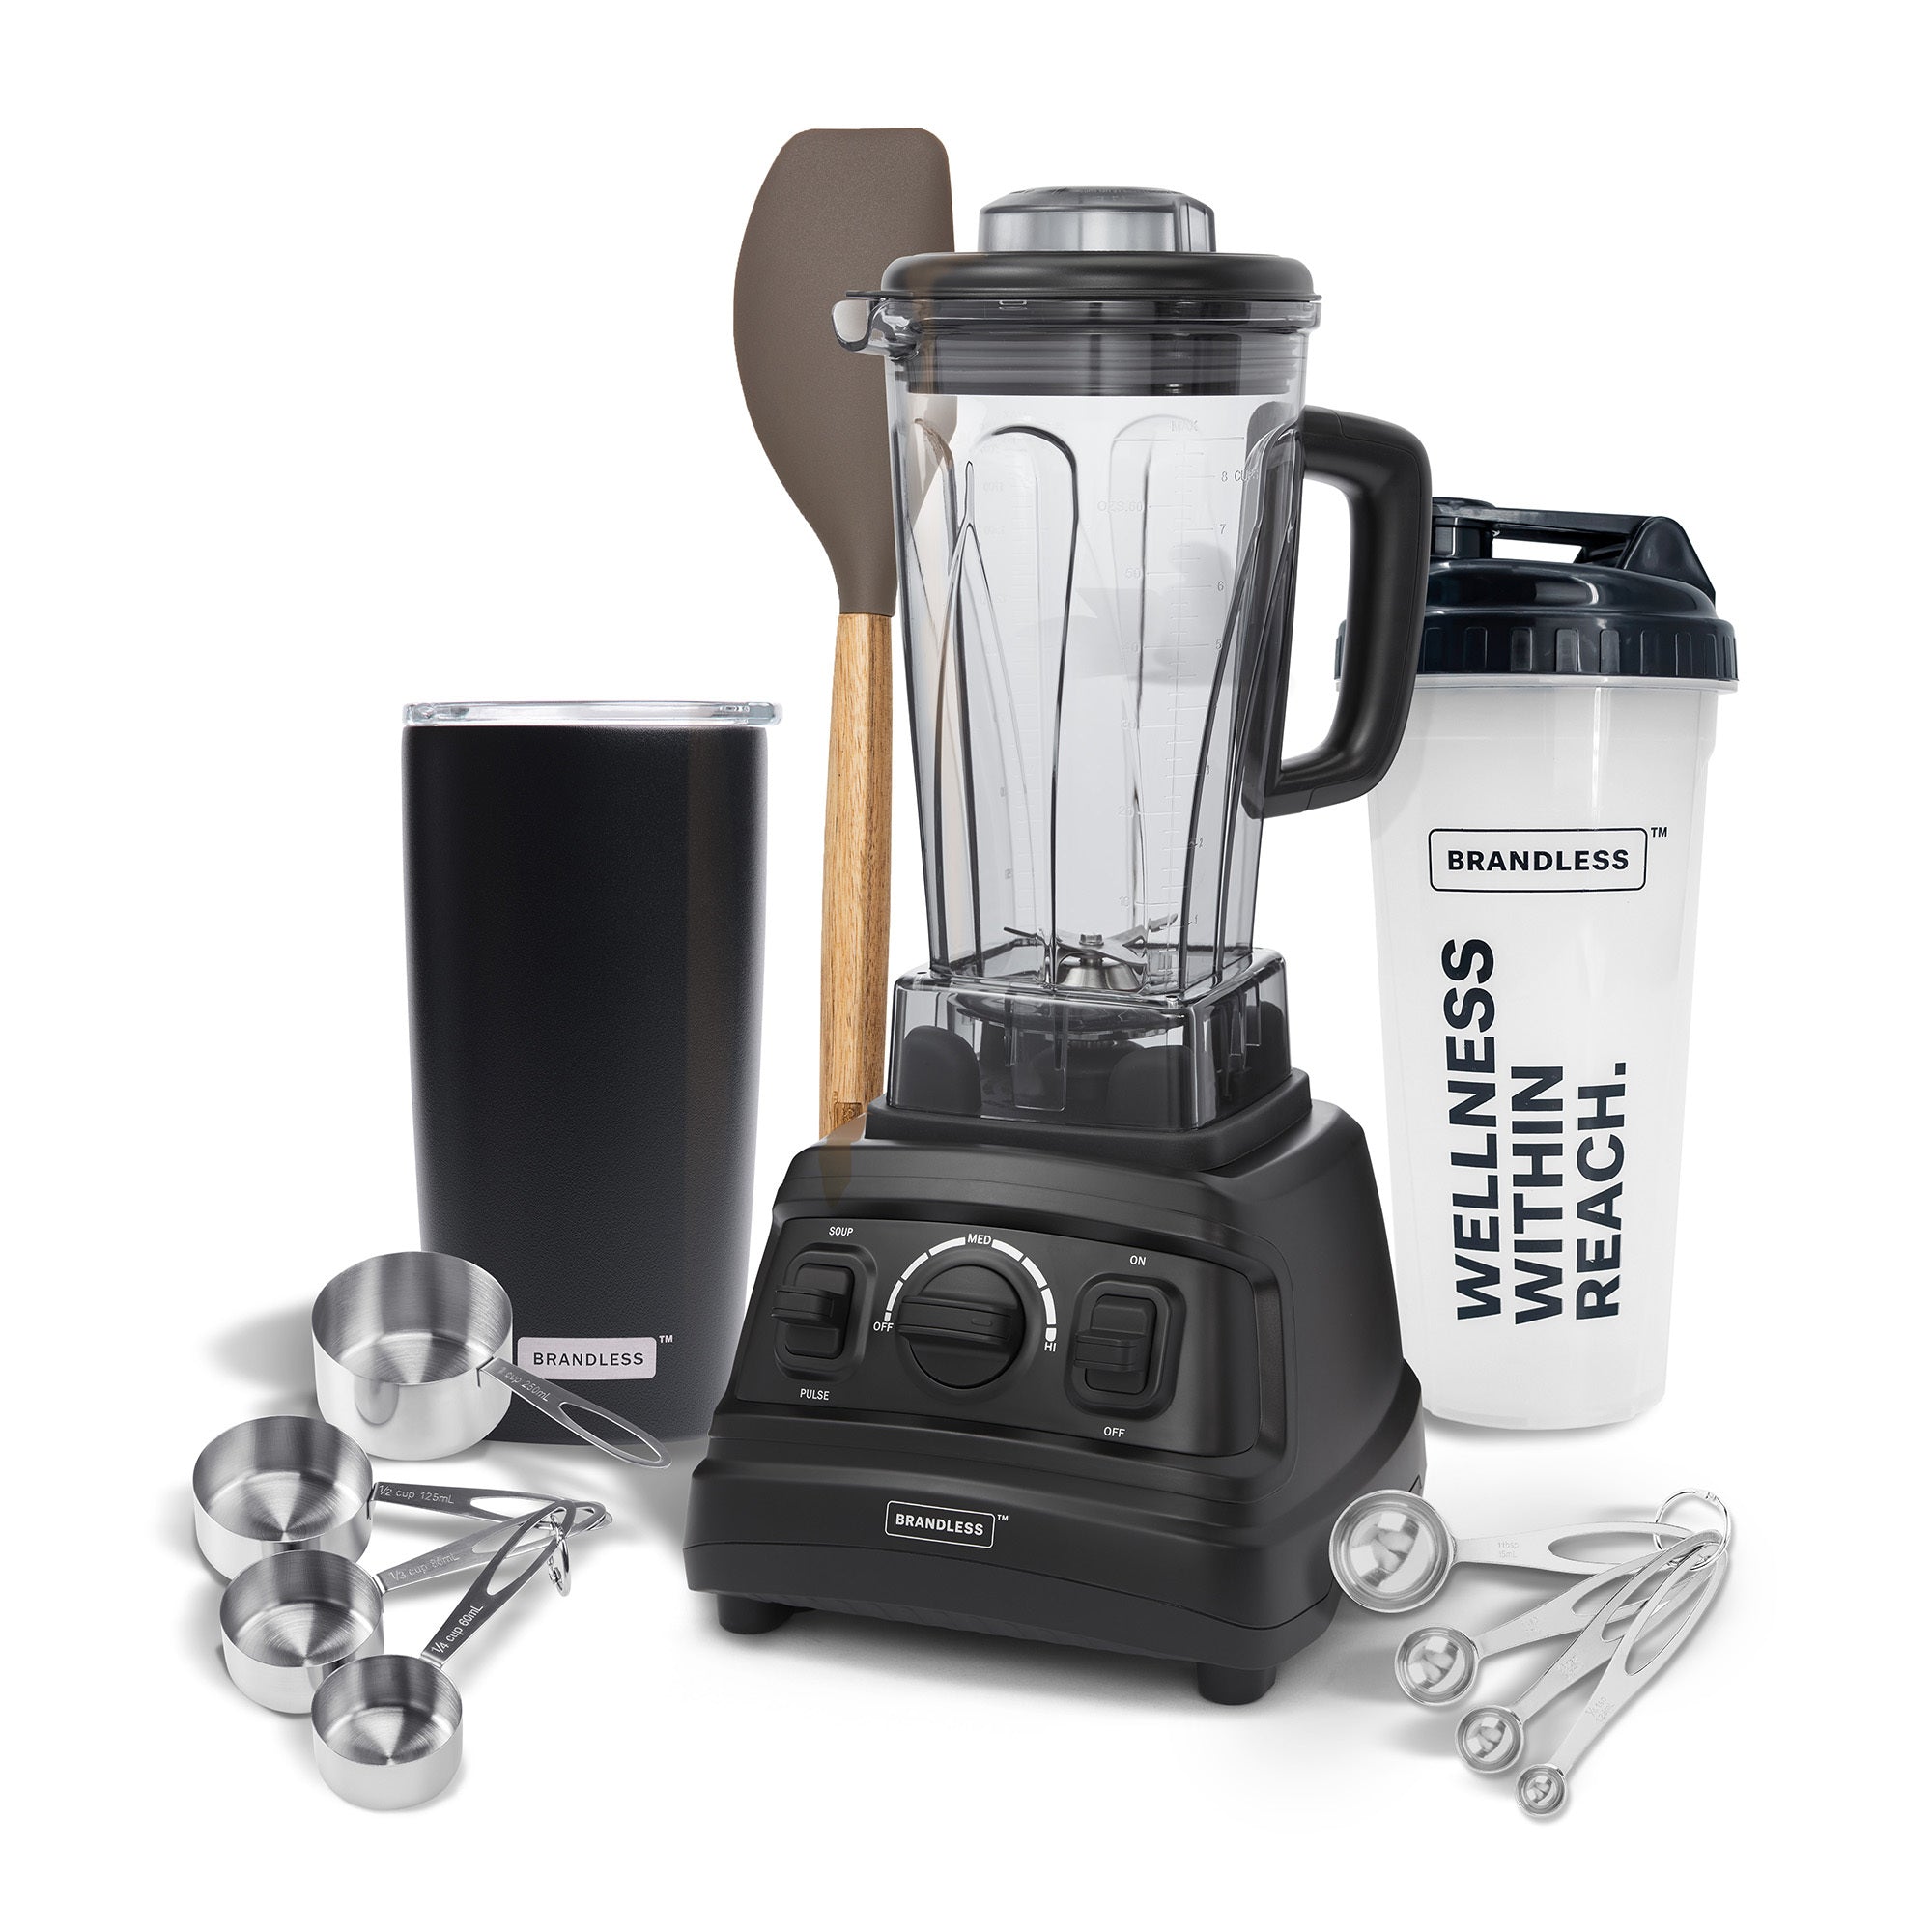 Pro-blender, measuring cups and spoons, silicone spatula, stainless steel tumbler, and shaker bottle with wellness within reach screenprinted on it.